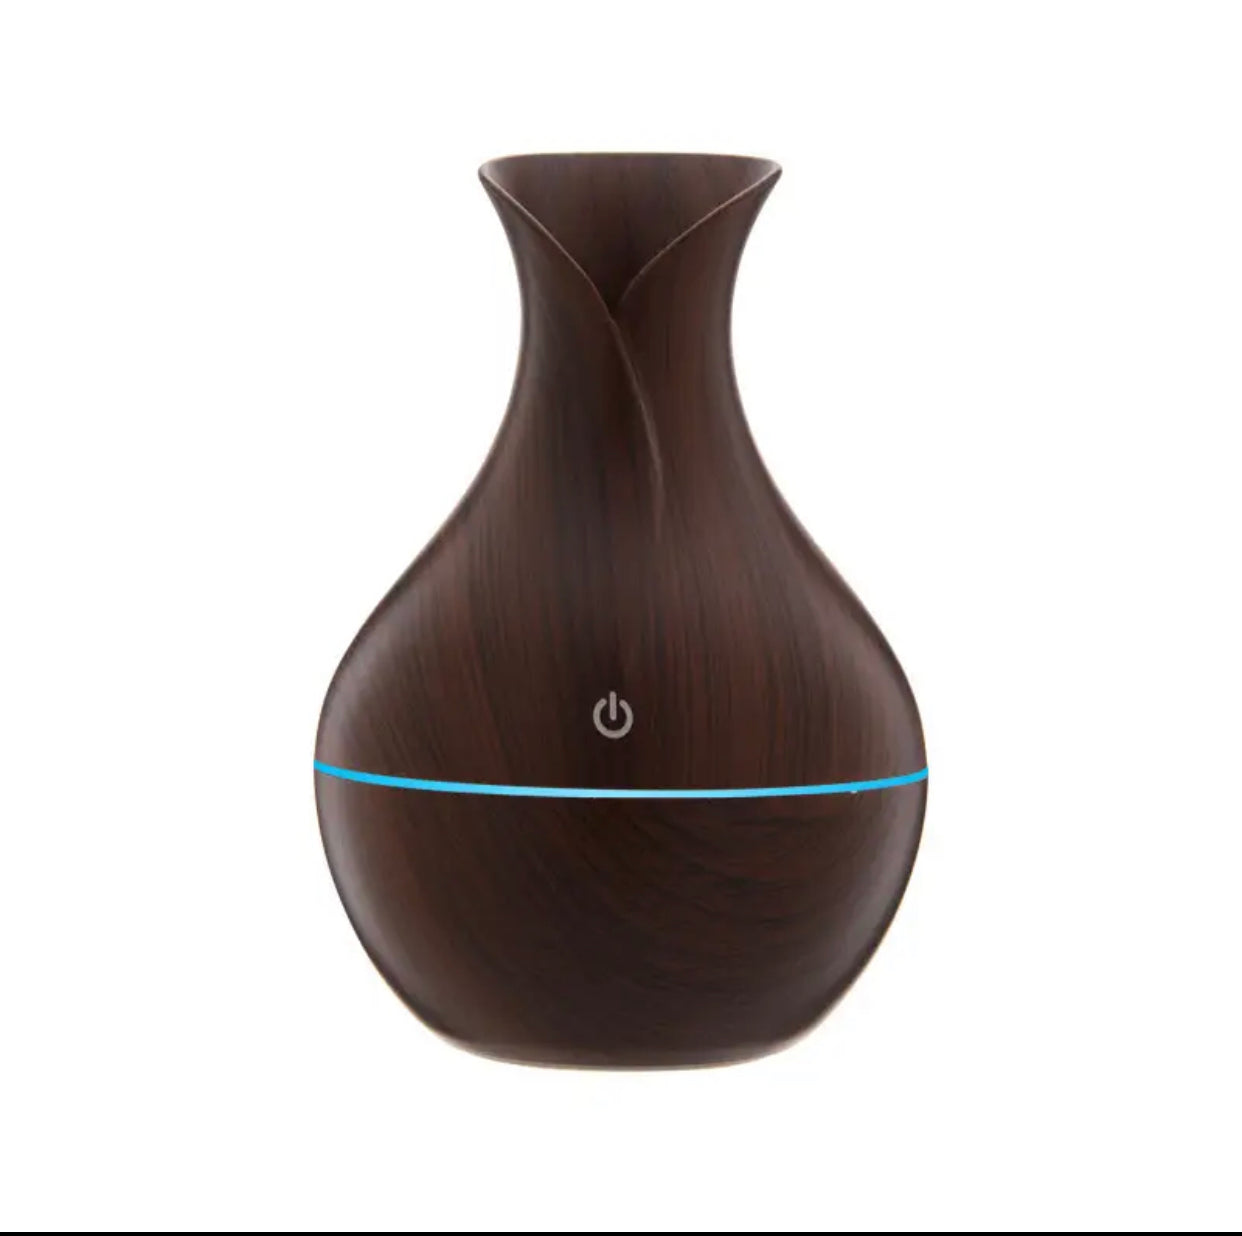 Vase in wood grain - diffuser - humidifier: naturalness meets modern technology